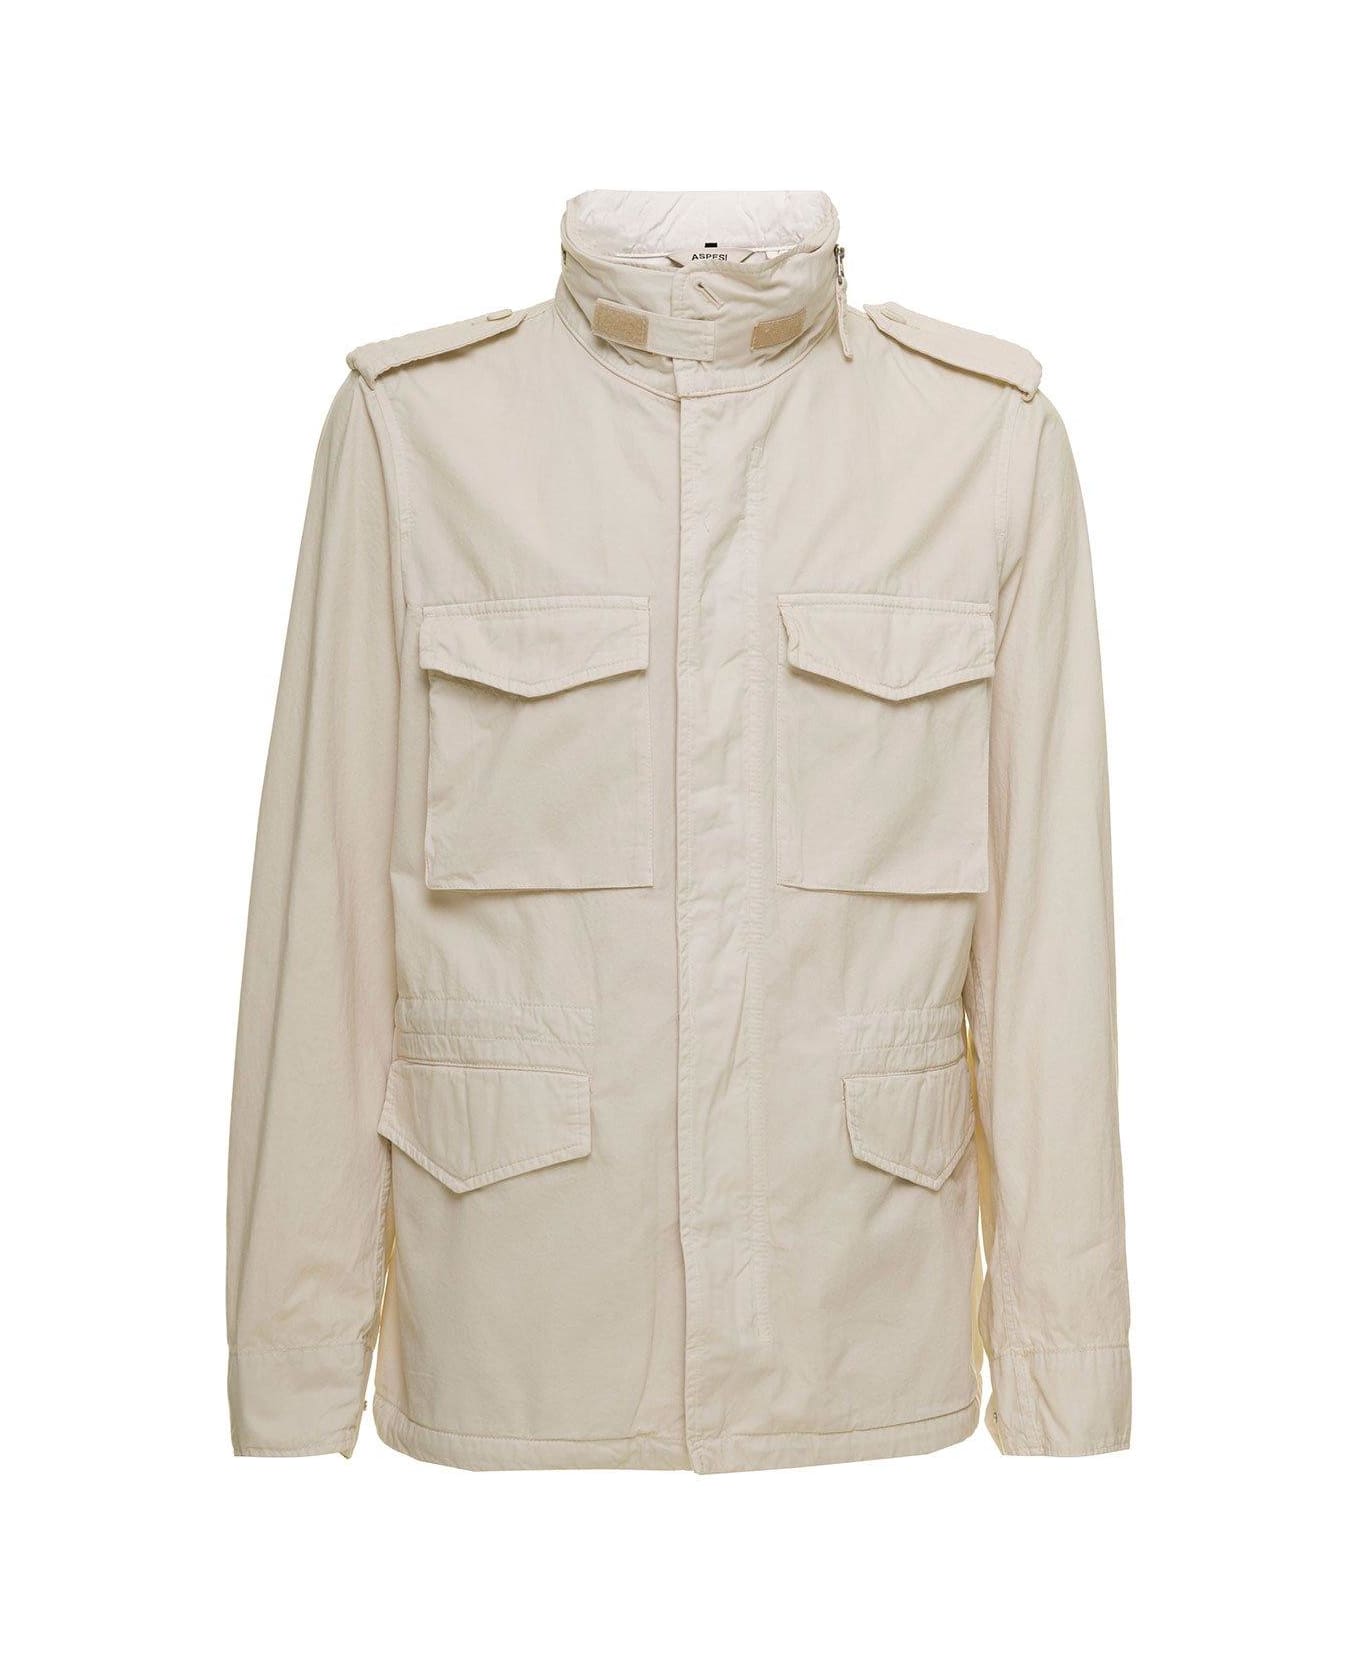 Aspesi Stand-up Collared Flap-pocketed Military Jacket - Beige